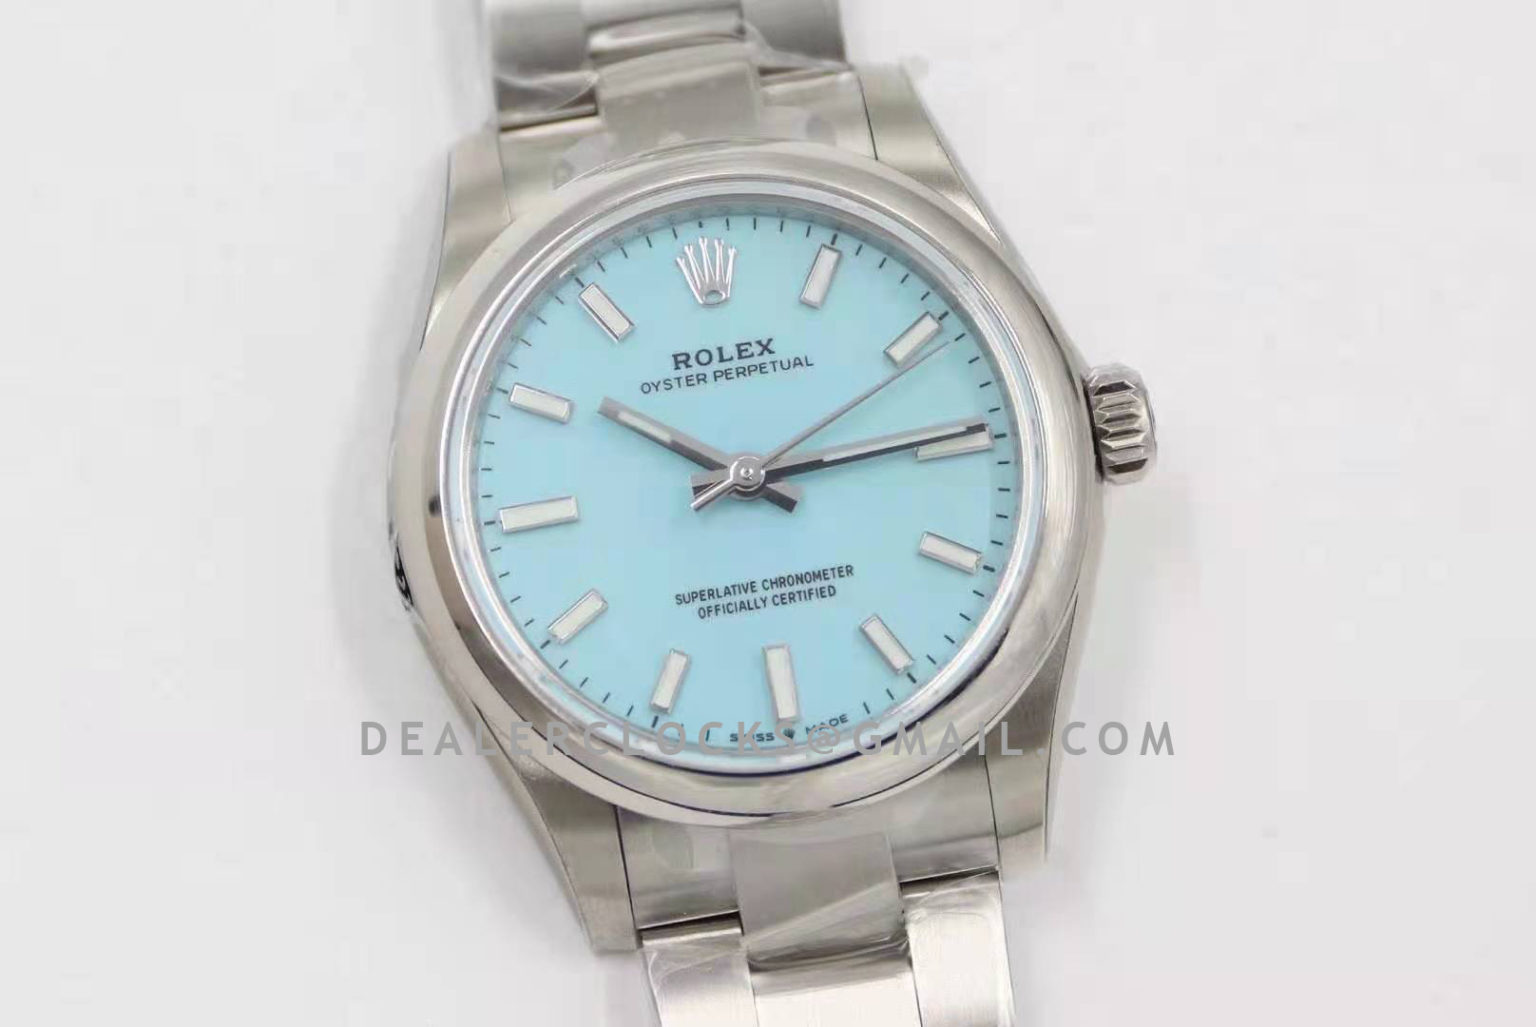 Oyster Perpetual 31mm Turquoise Blue Dial 277200 - Dealer Clocks